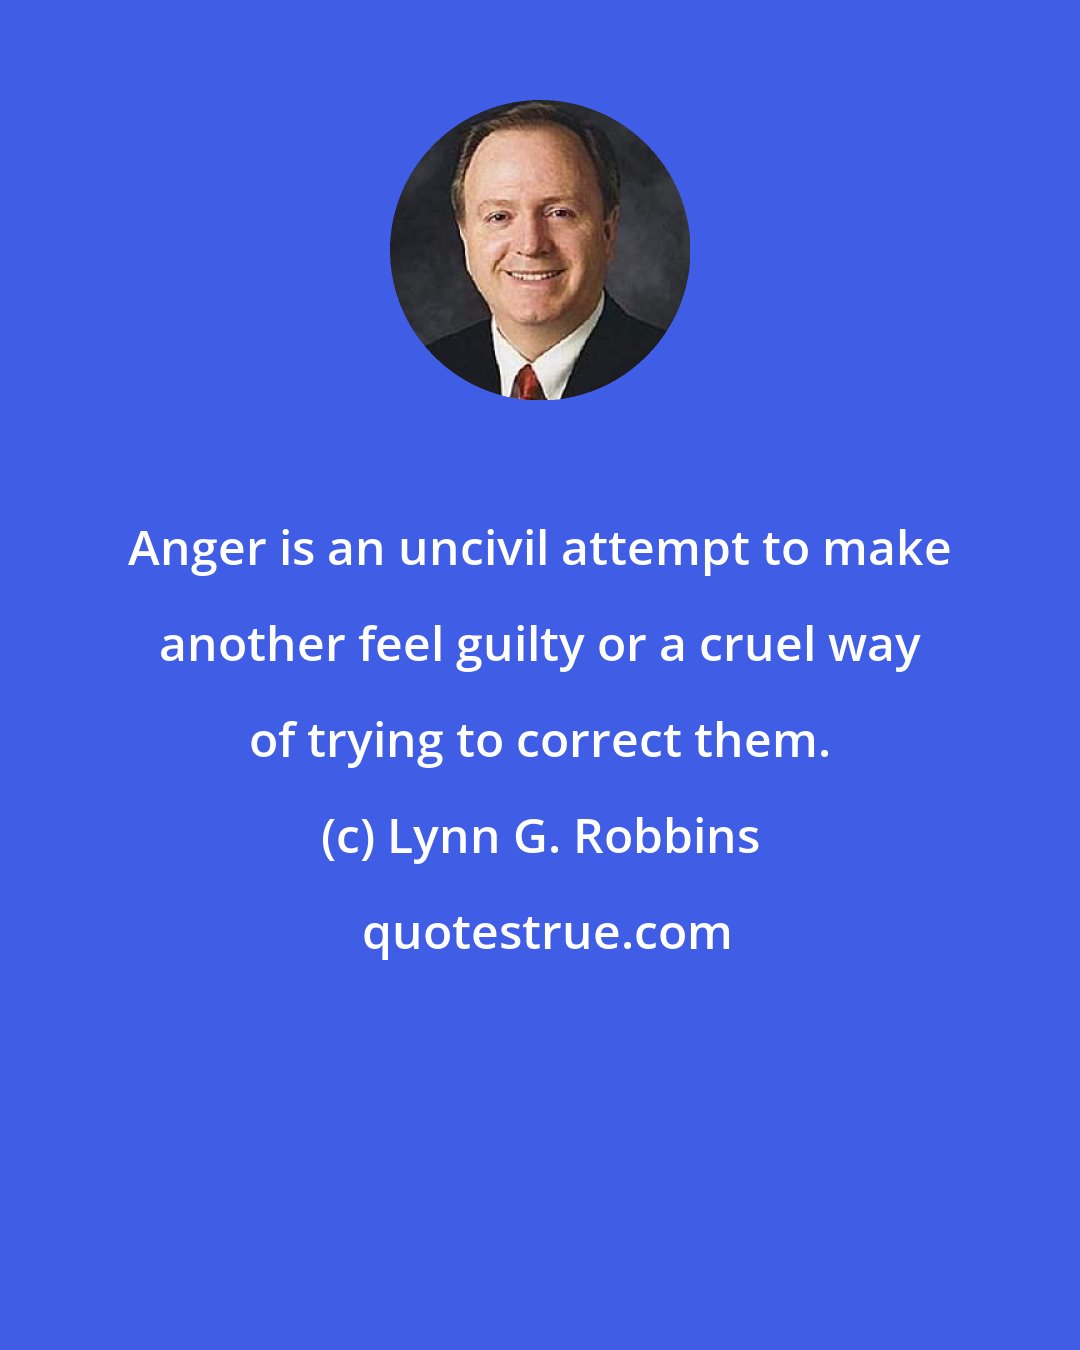 Lynn G. Robbins: Anger is an uncivil attempt to make another feel guilty or a cruel way of trying to correct them.